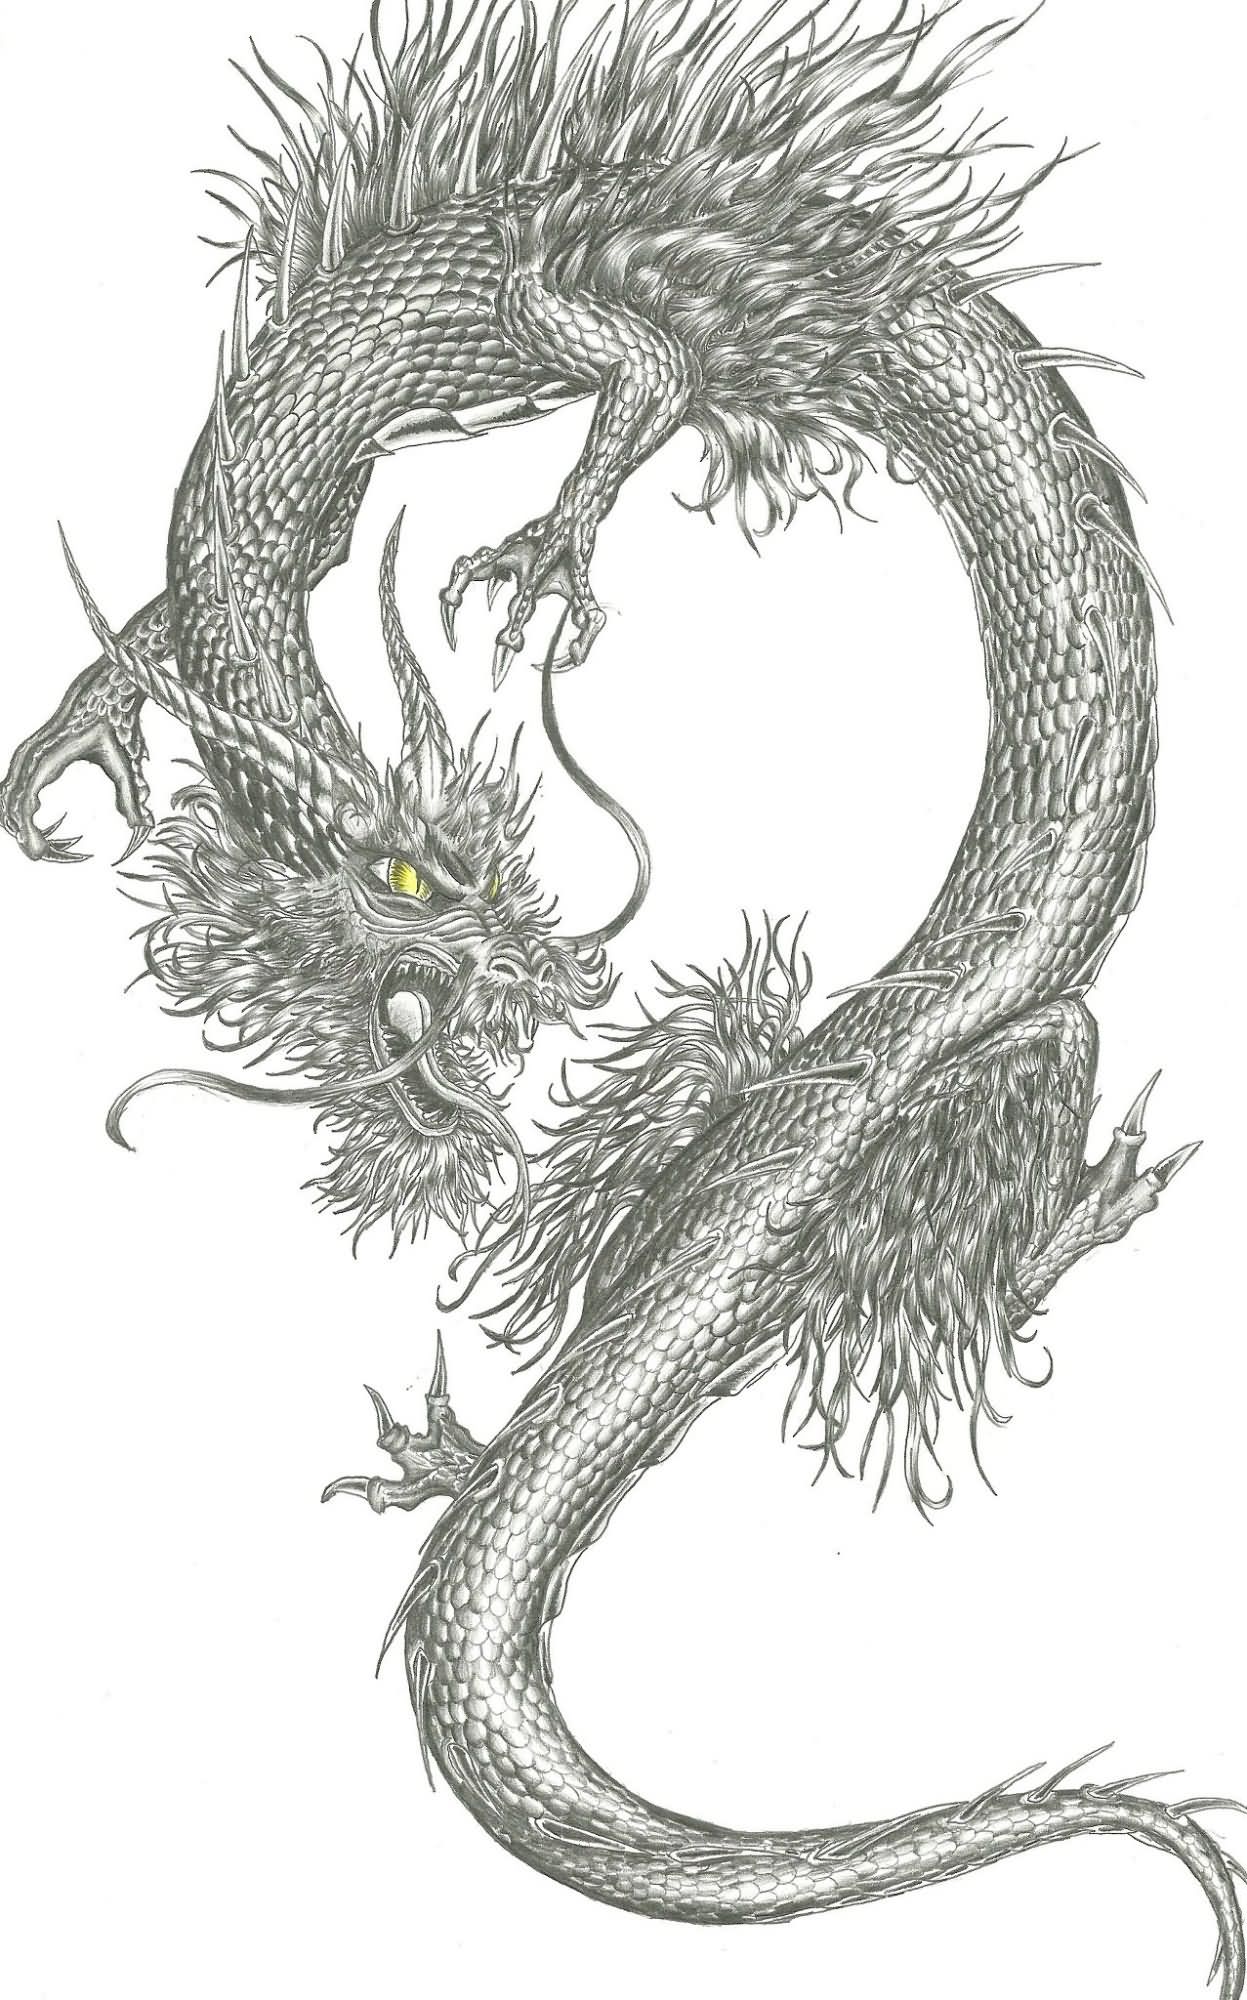 Awesome Black And Grey Chinese Dragon Tattoo Design By Sarah Perstolen